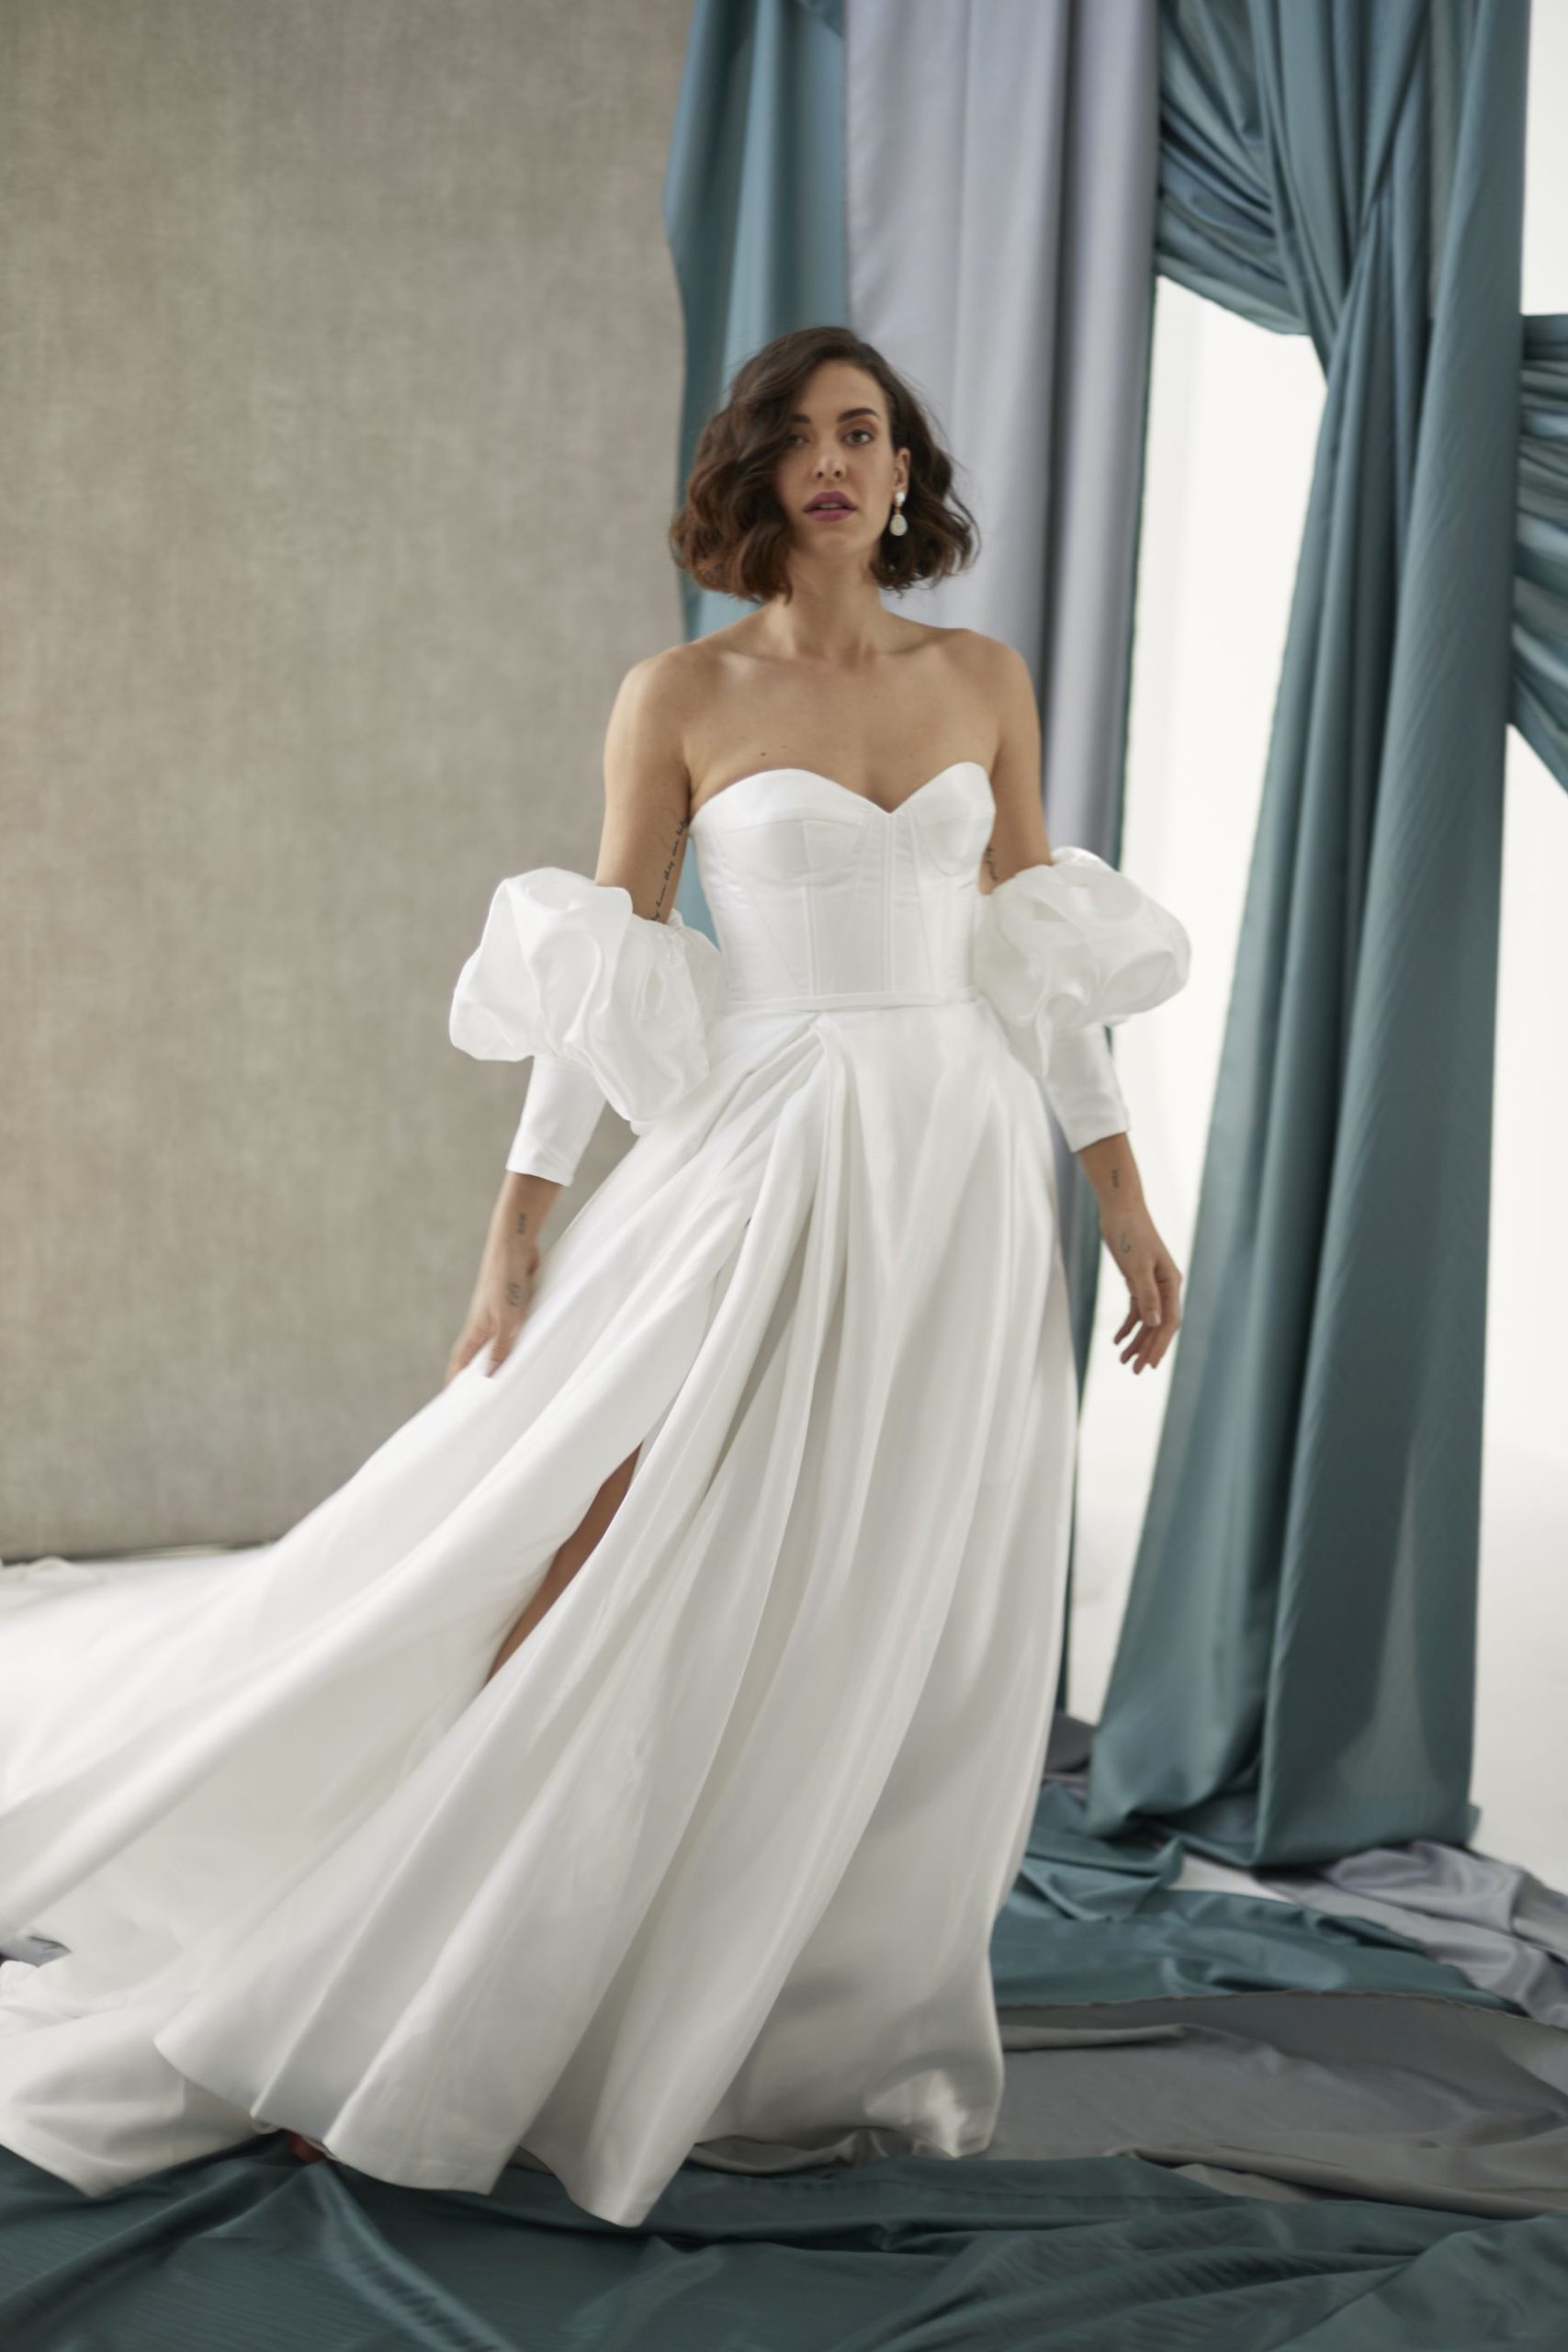 Le Belle V2 by Hera Couture is - Homestead Road Bridal Co